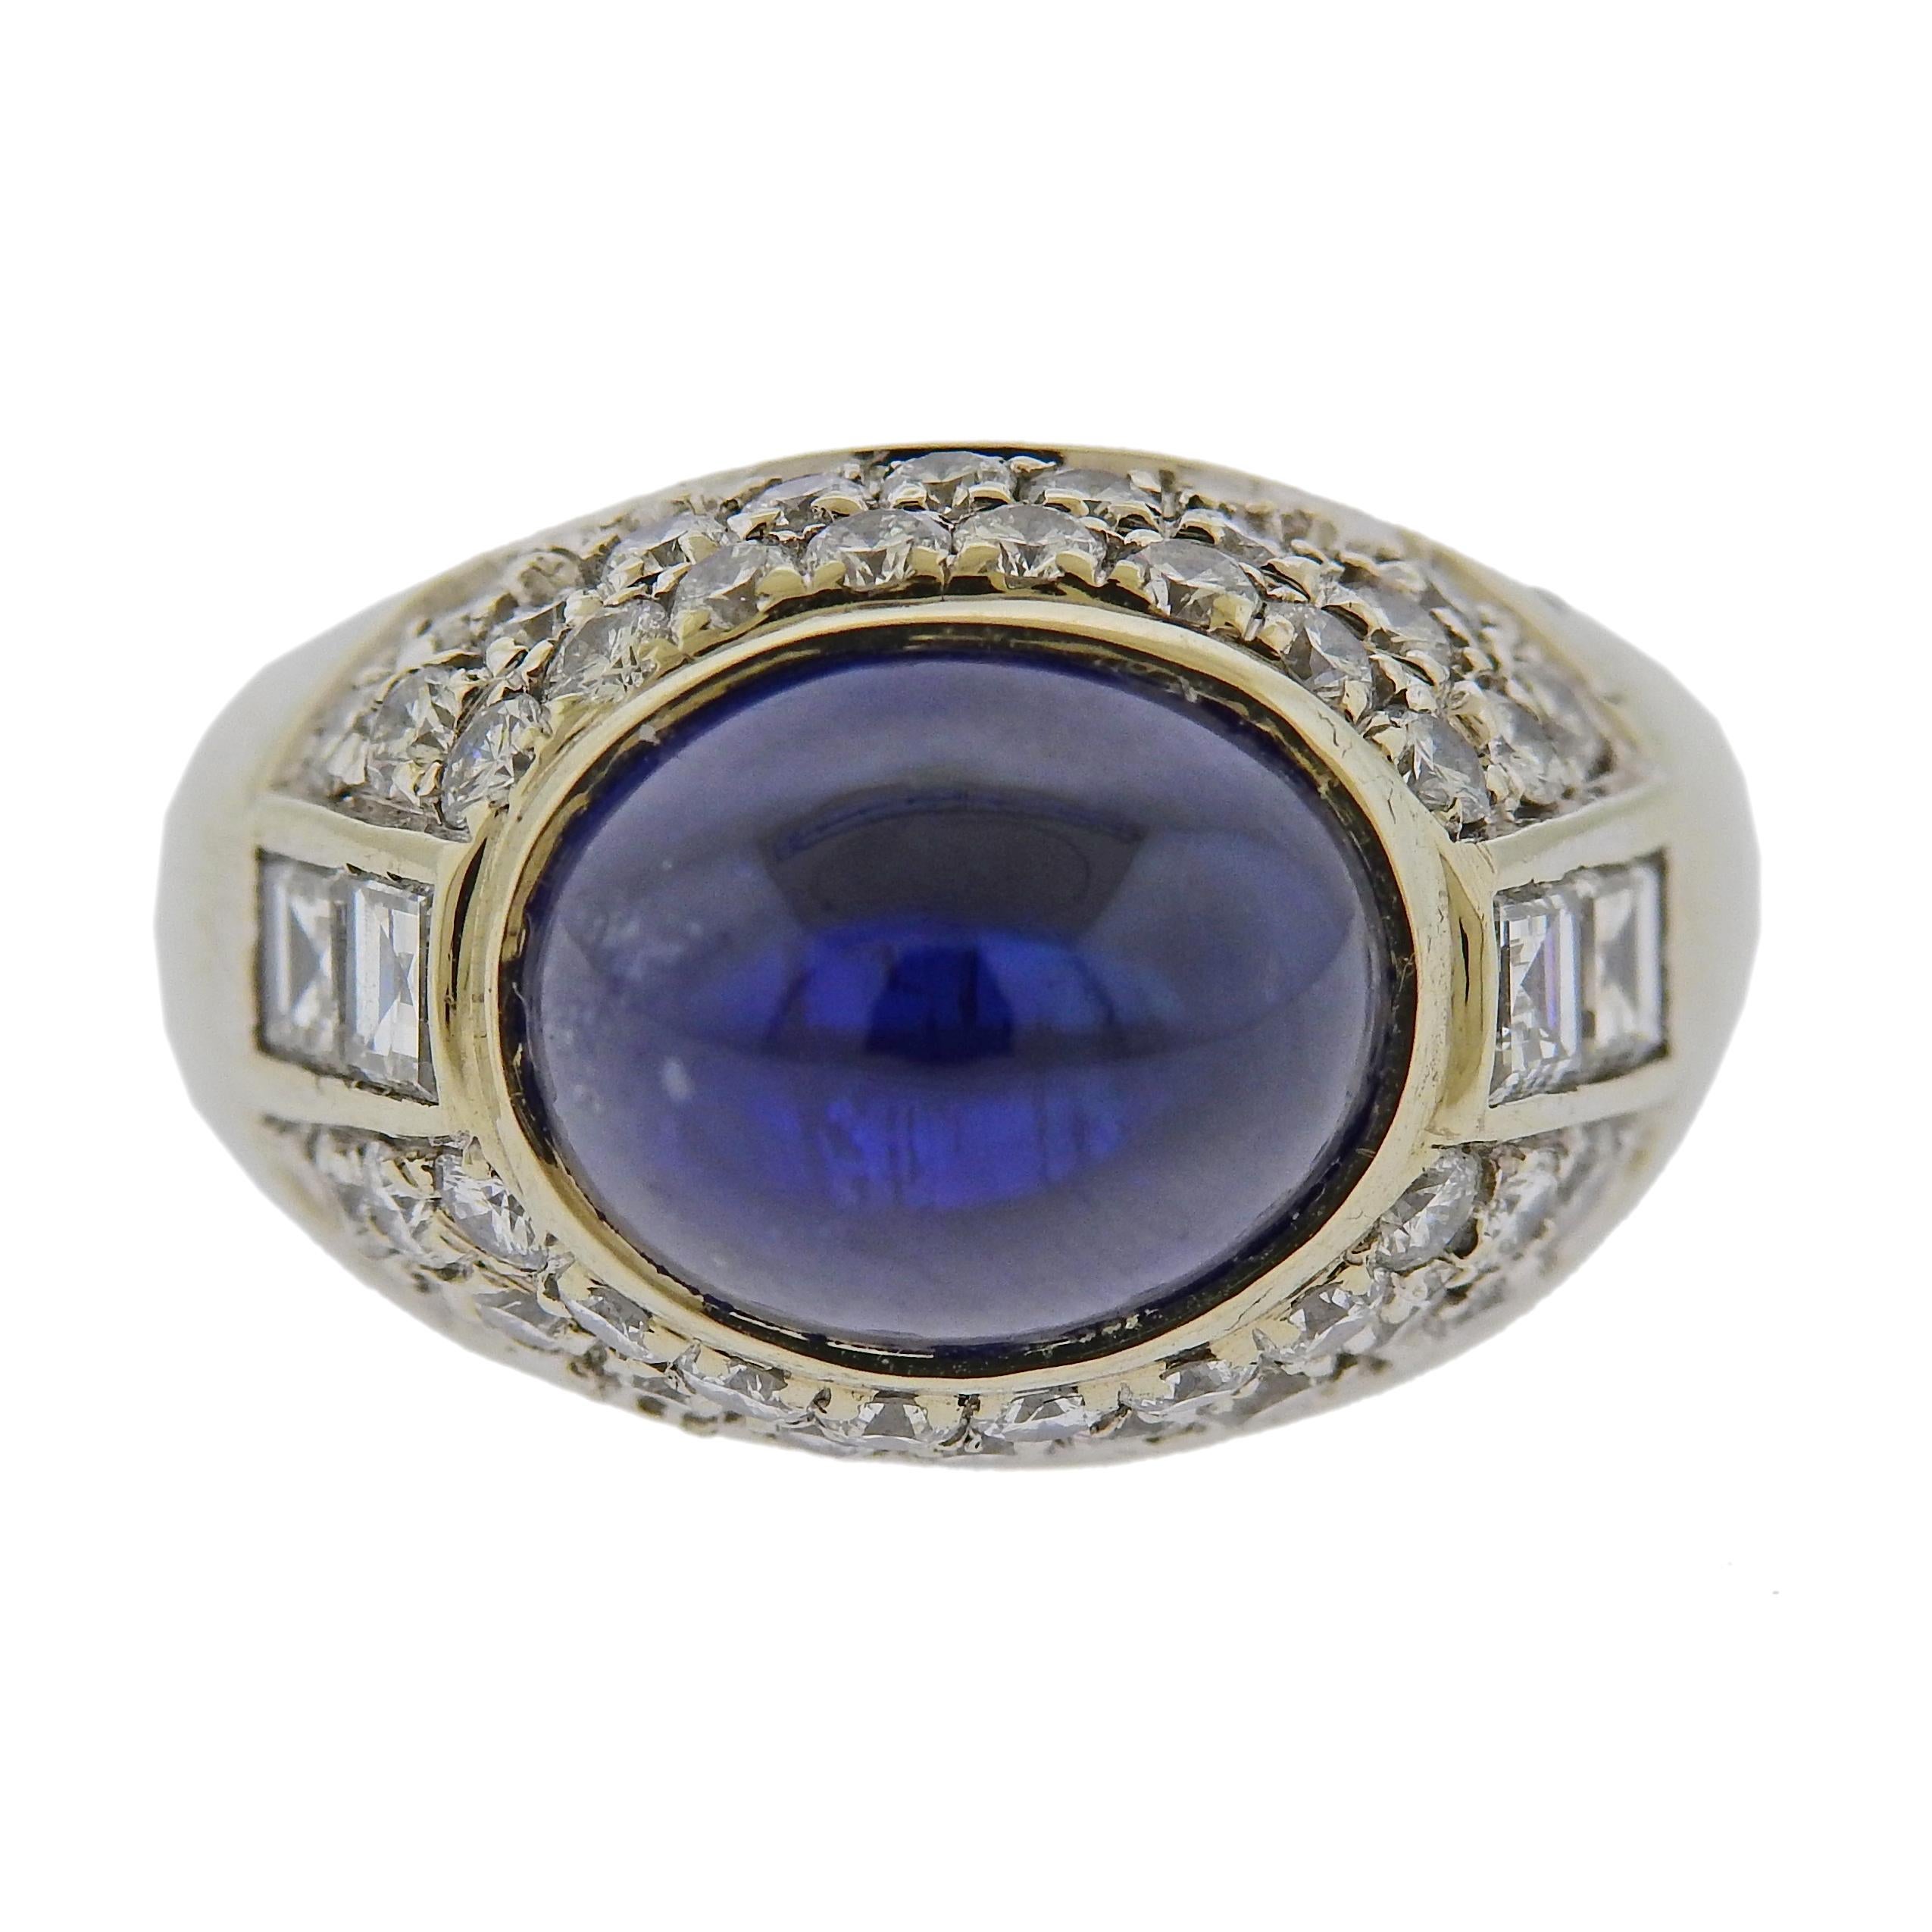 18k white gold cocktail ring, set with a 9.3mm x 11.4mm synthetic blue sapphire cabochon, surrounded with approx. 0.82ctw in diamonds. Ring size 5, ring top is 13.7mm wide, sits approx. 14mm from the top of the finger when worn. Tested 18k, weighs